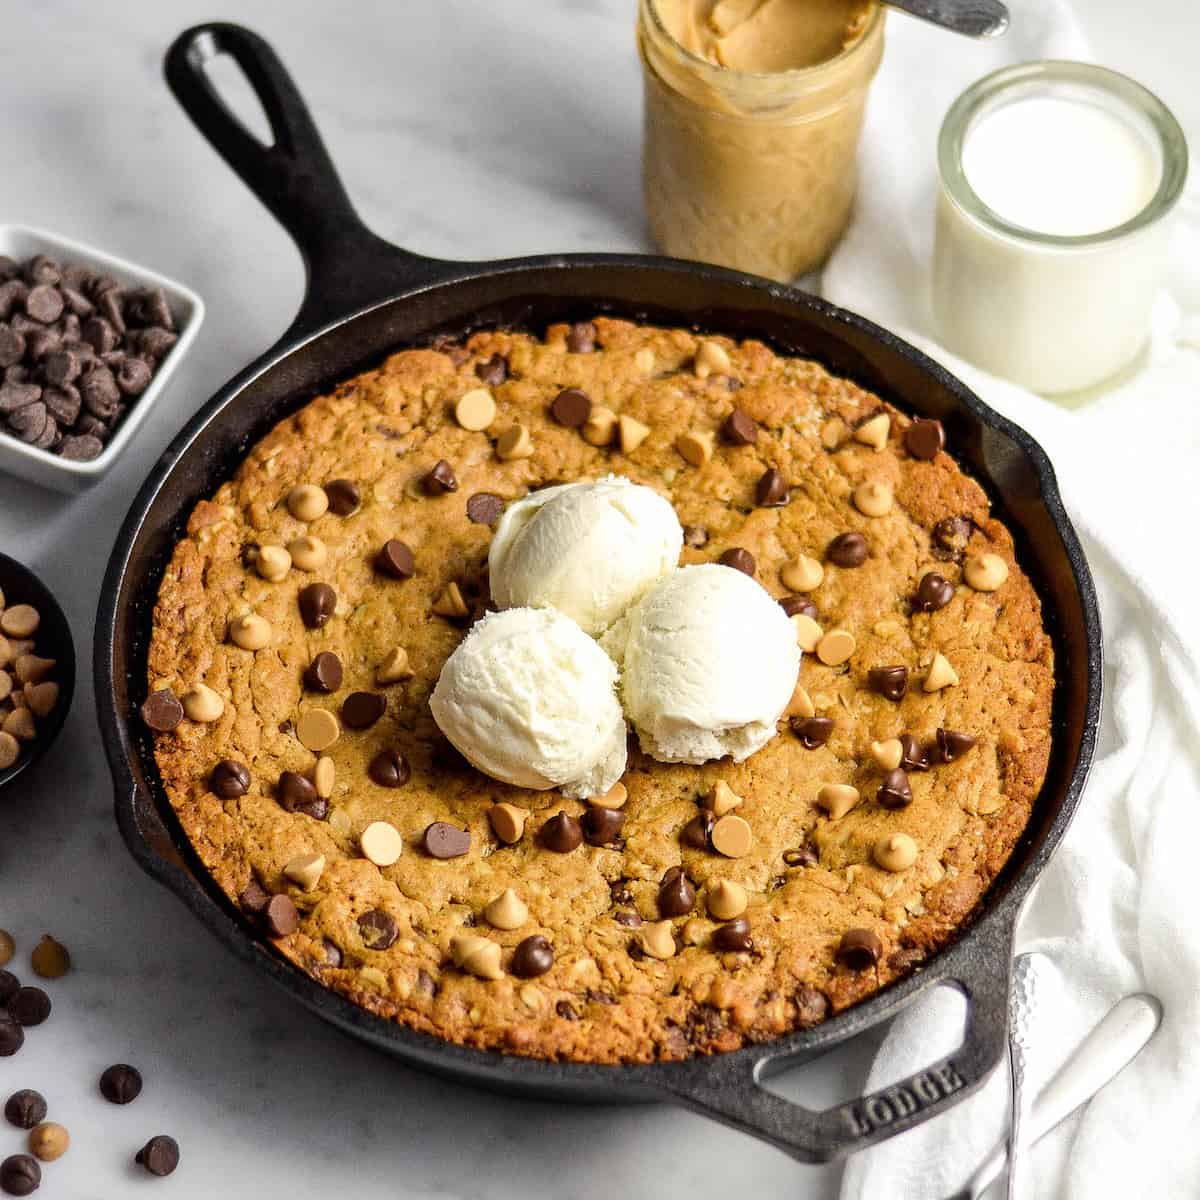 Healthy Skillet Peanut Butter Cookie with three scoops of ice cream on top